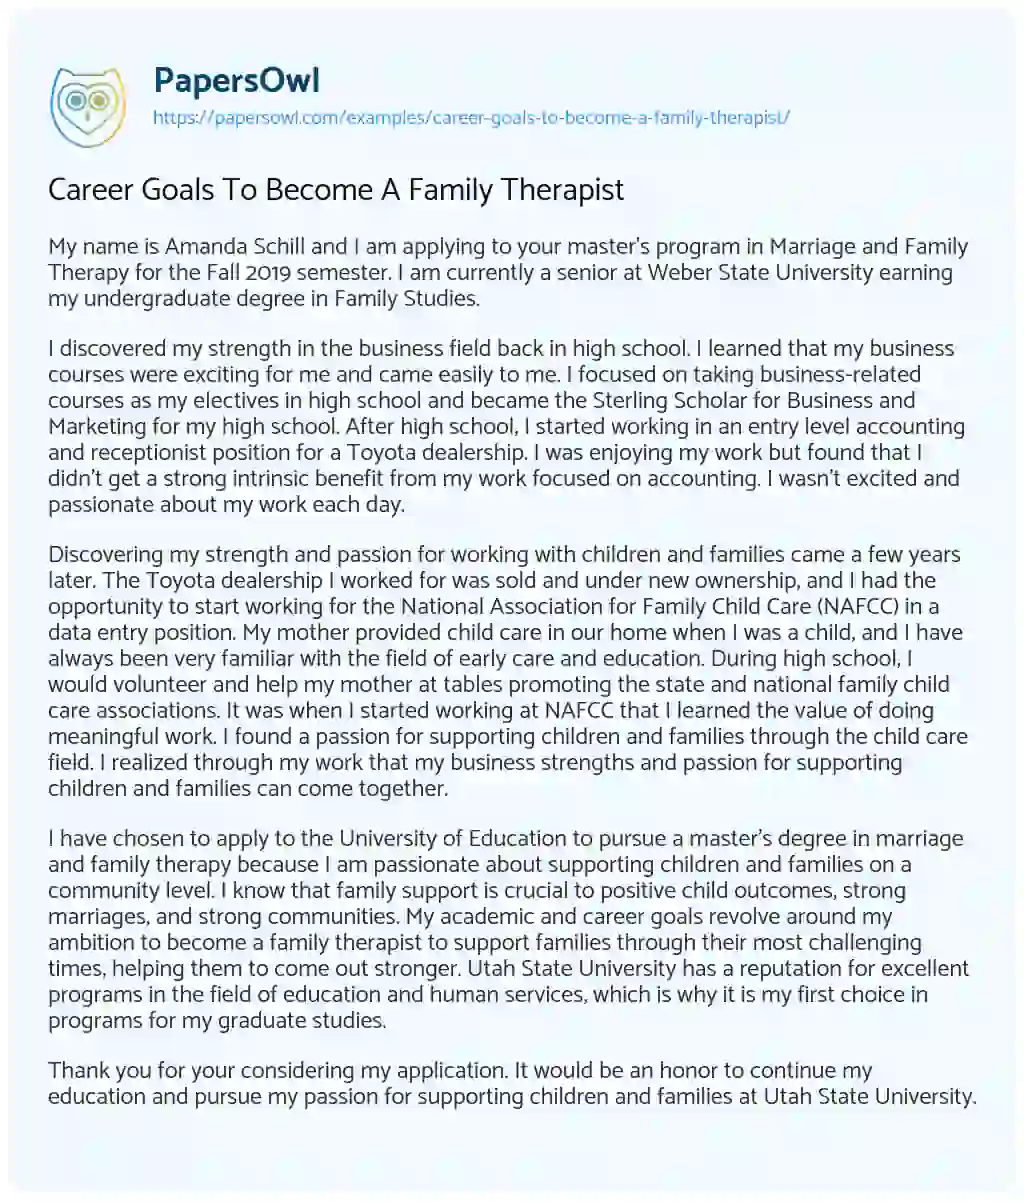 Essay on Career Goals to Become a Family Therapist